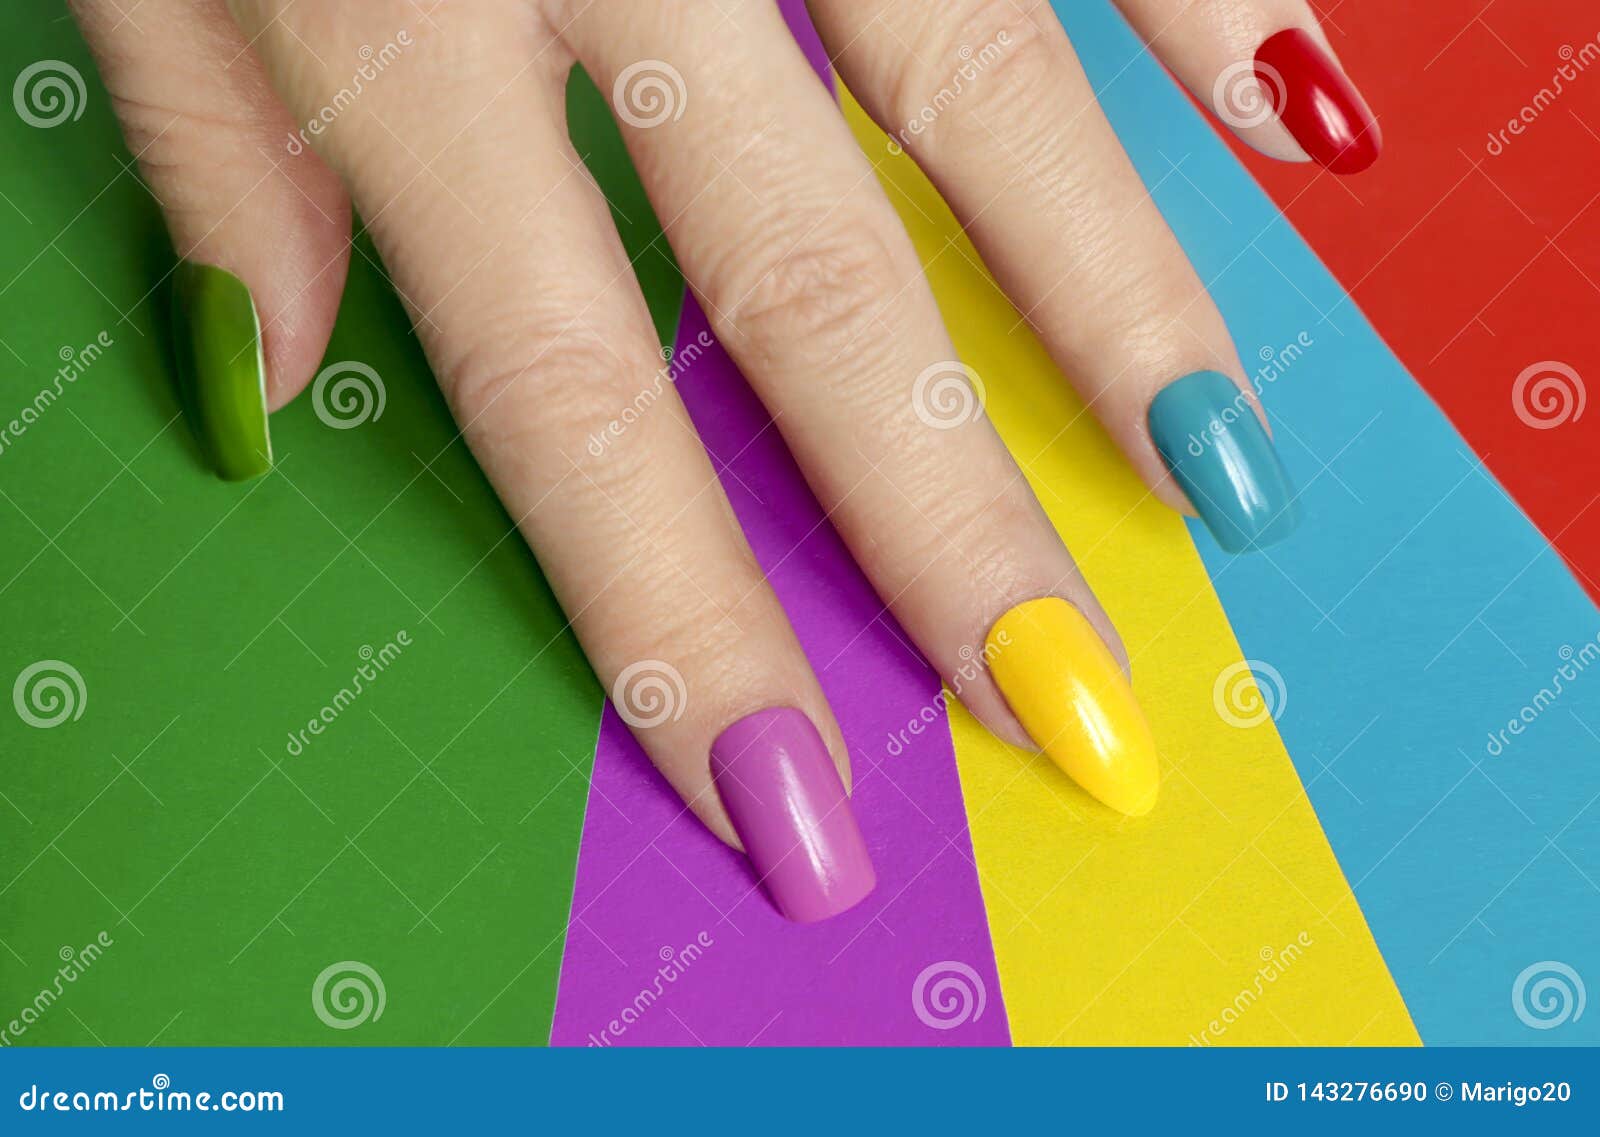 square nail design for summer